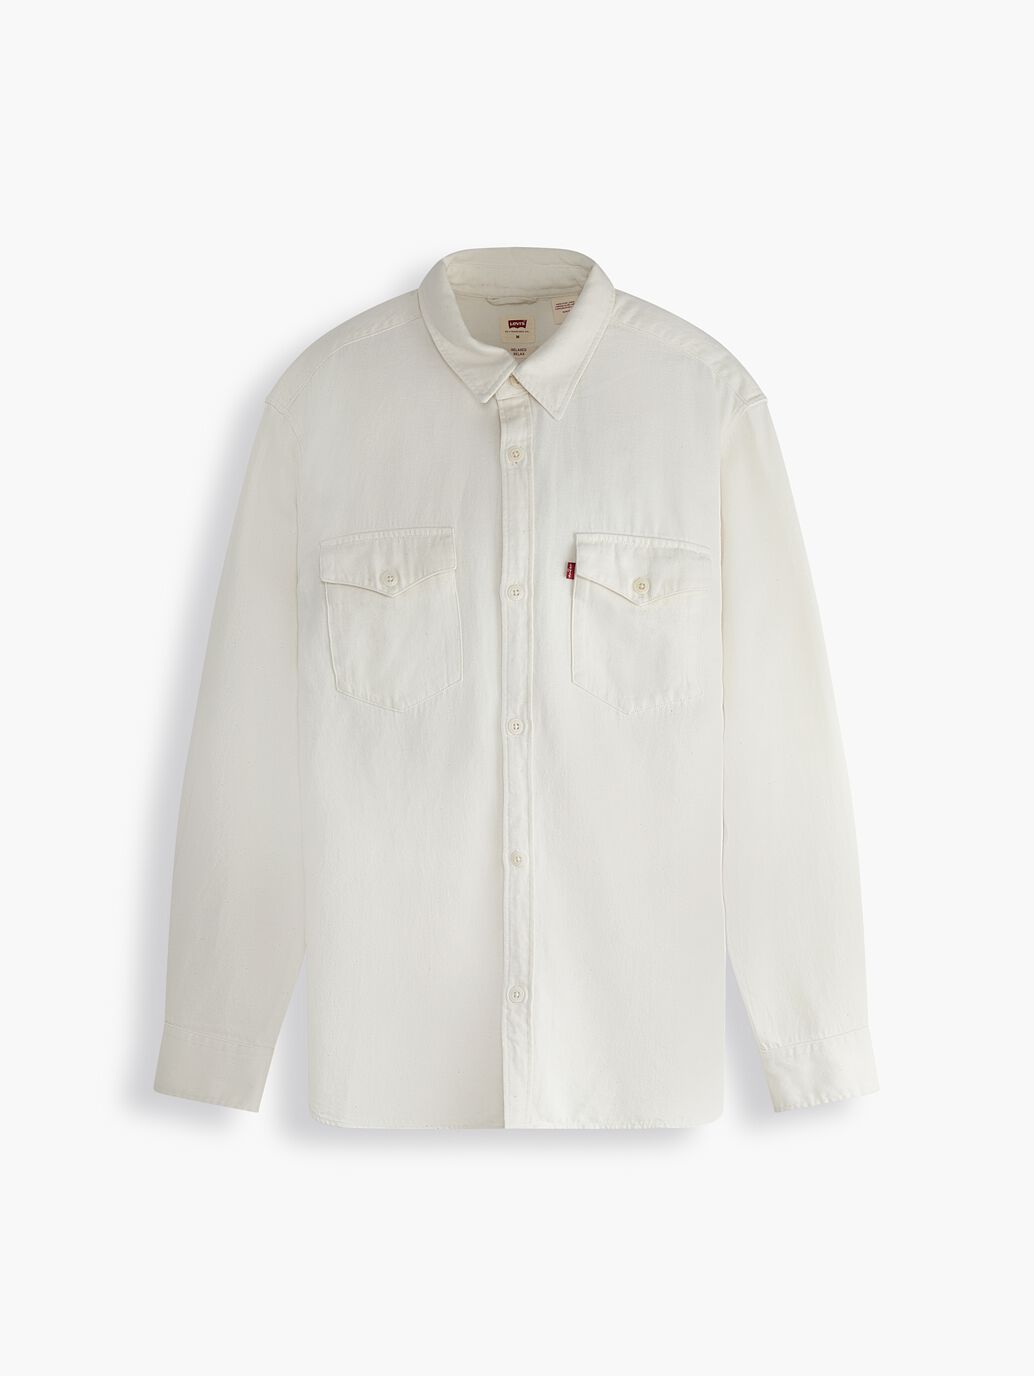 Men's Relaxed Fit Western Shirt in Neutrals - Shop On Shirts